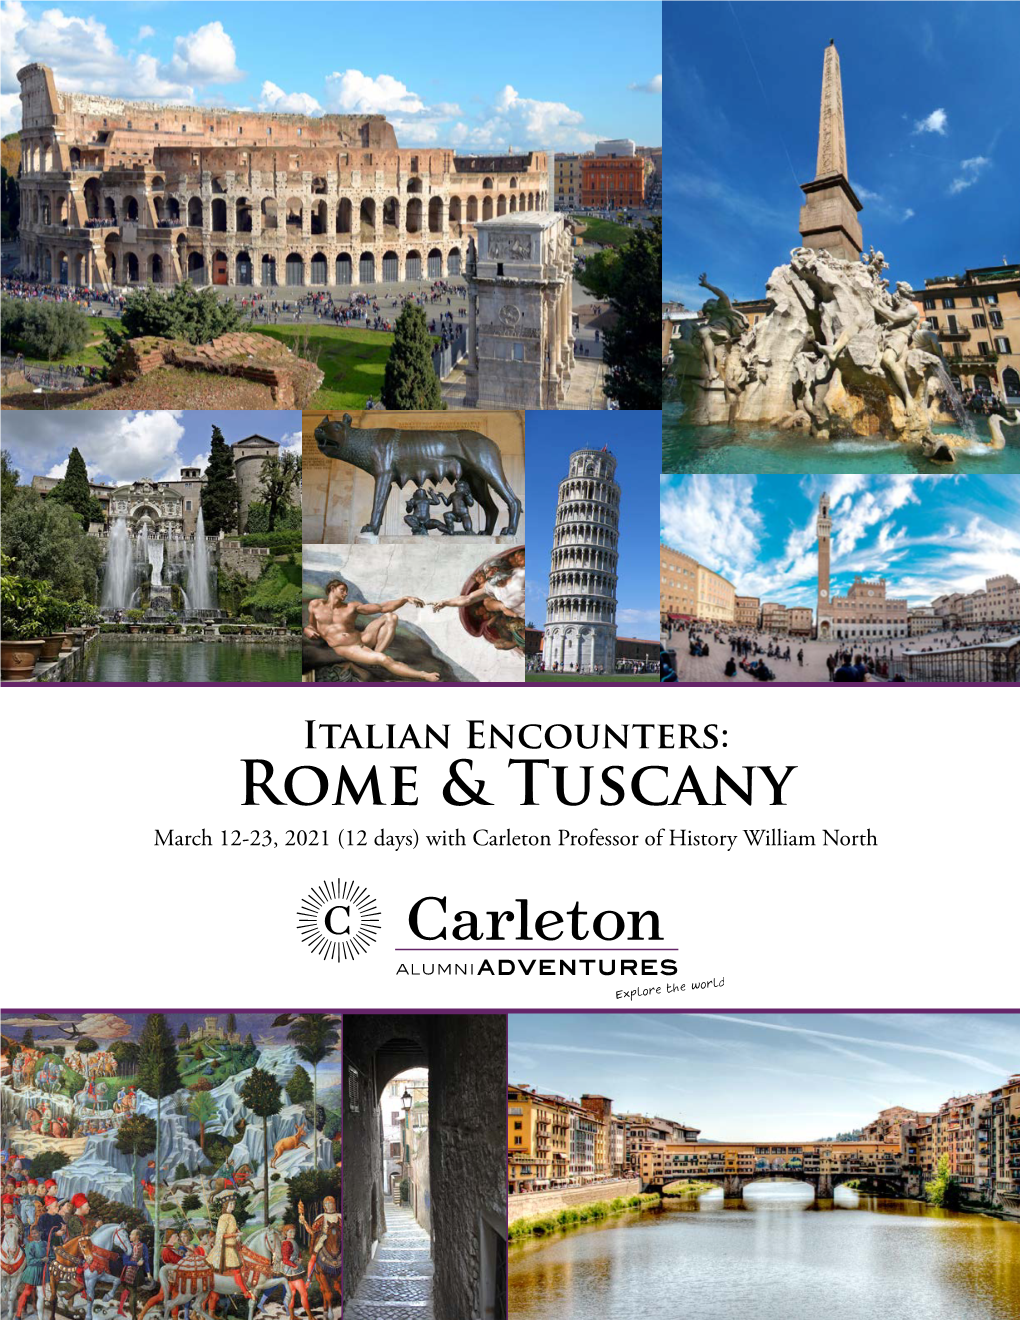 Italian Encounters: Rome & Tuscany March 12-23, 2021 (12 Days) with Carleton Professor of History William North Pisa Carleton Faculty Leader  5 FLORENCE